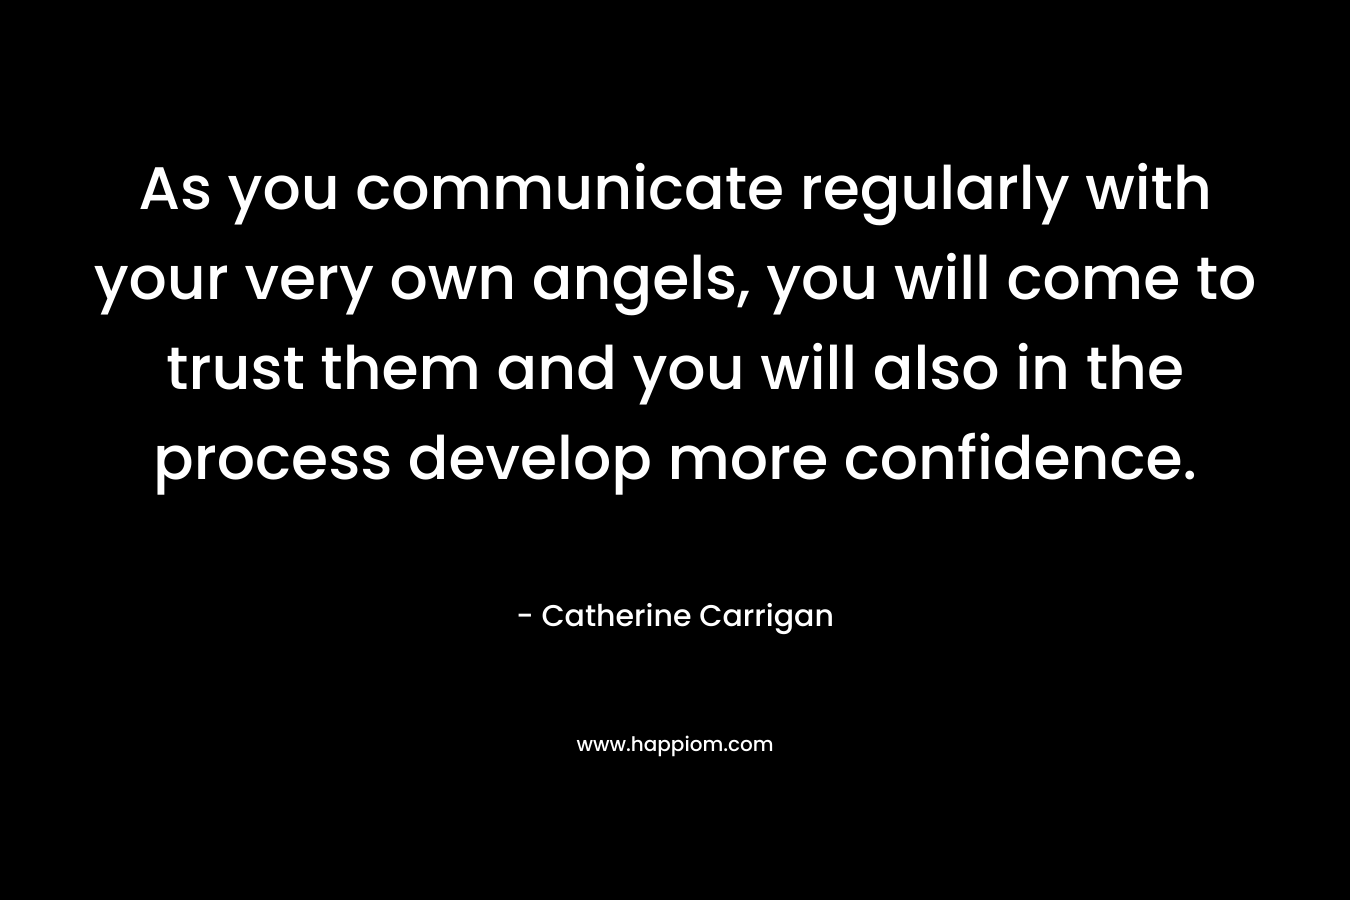 As you communicate regularly with your very own angels, you will come to trust them and you will also in the process develop more confidence.